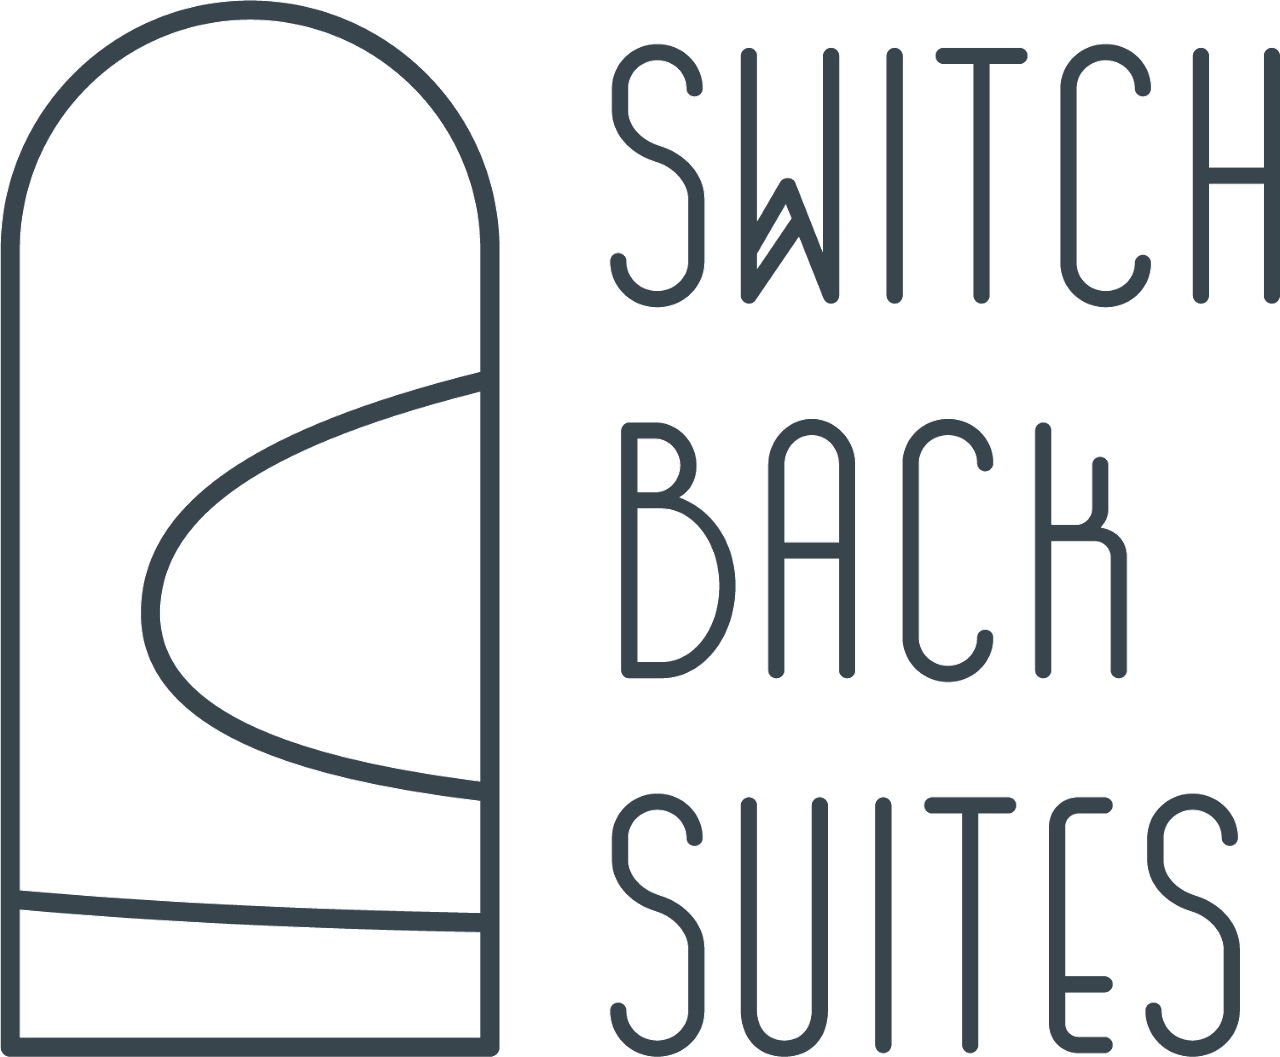 Switchback Suites - Kalispell Montana, Glacier National Park, and Flathead Lake Area Vacation Rentals and Property Management!